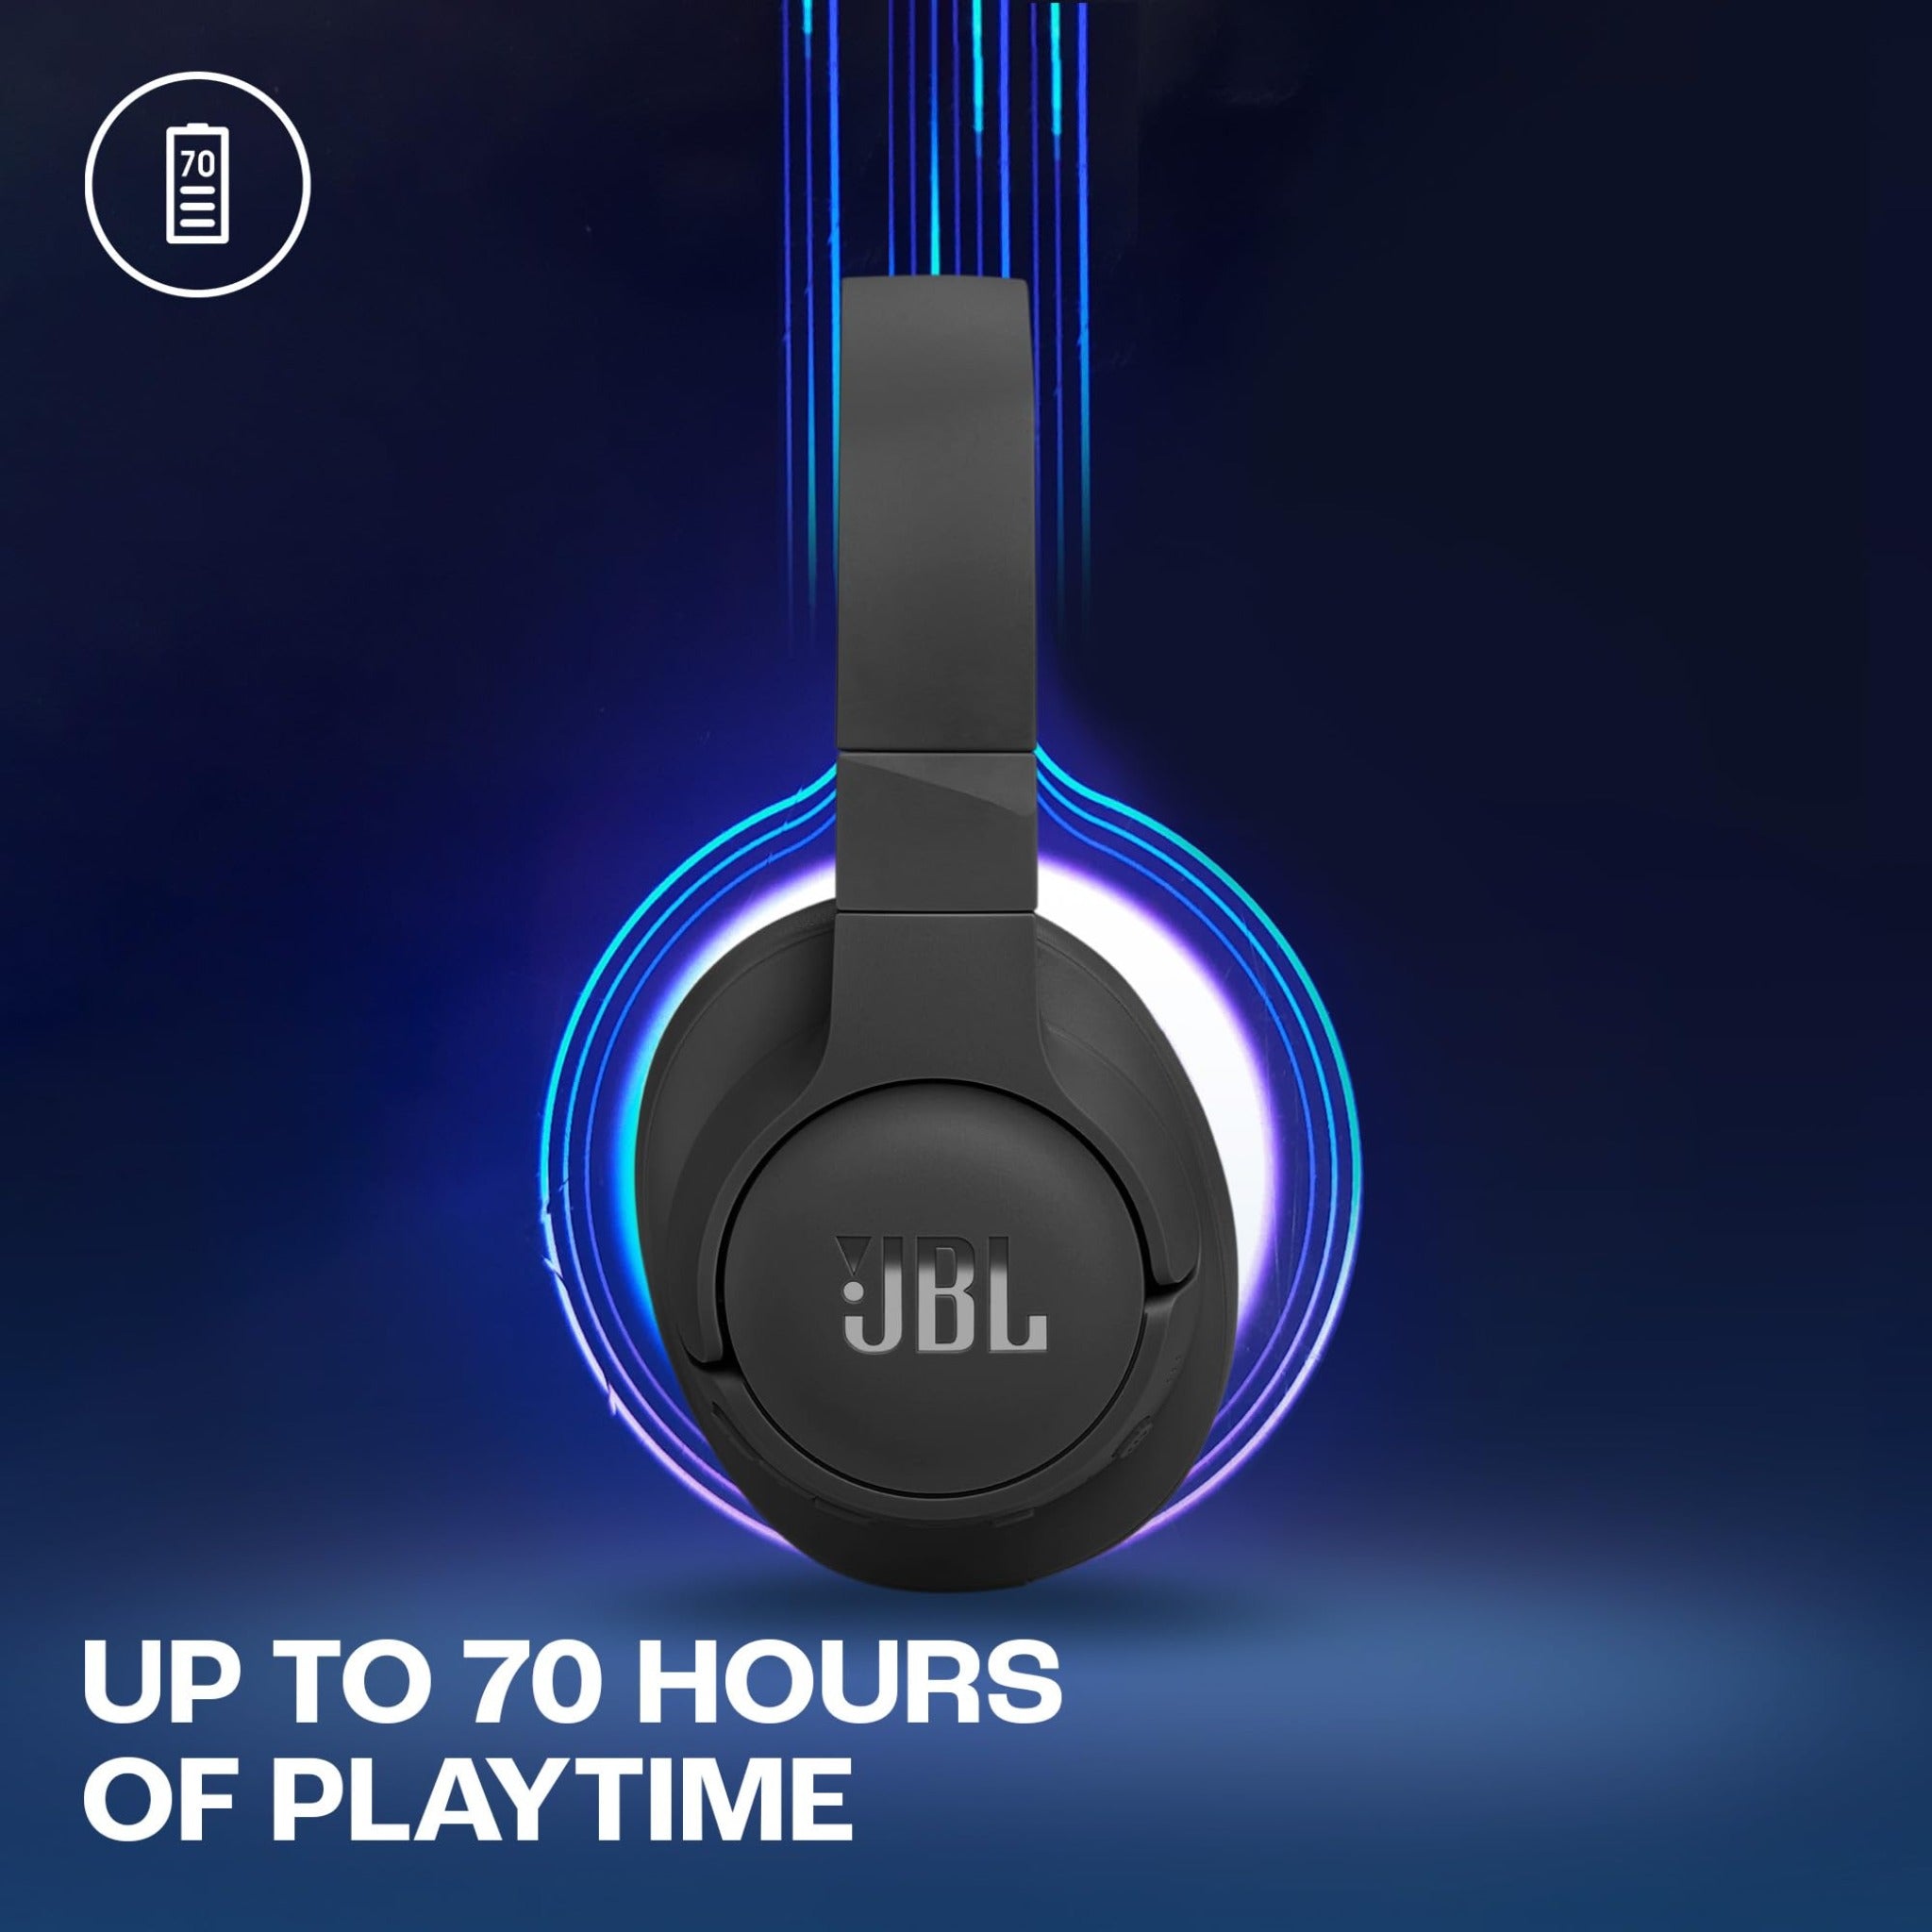 JBL 770NC / [ Bluetooth headphone with active noise cancellation